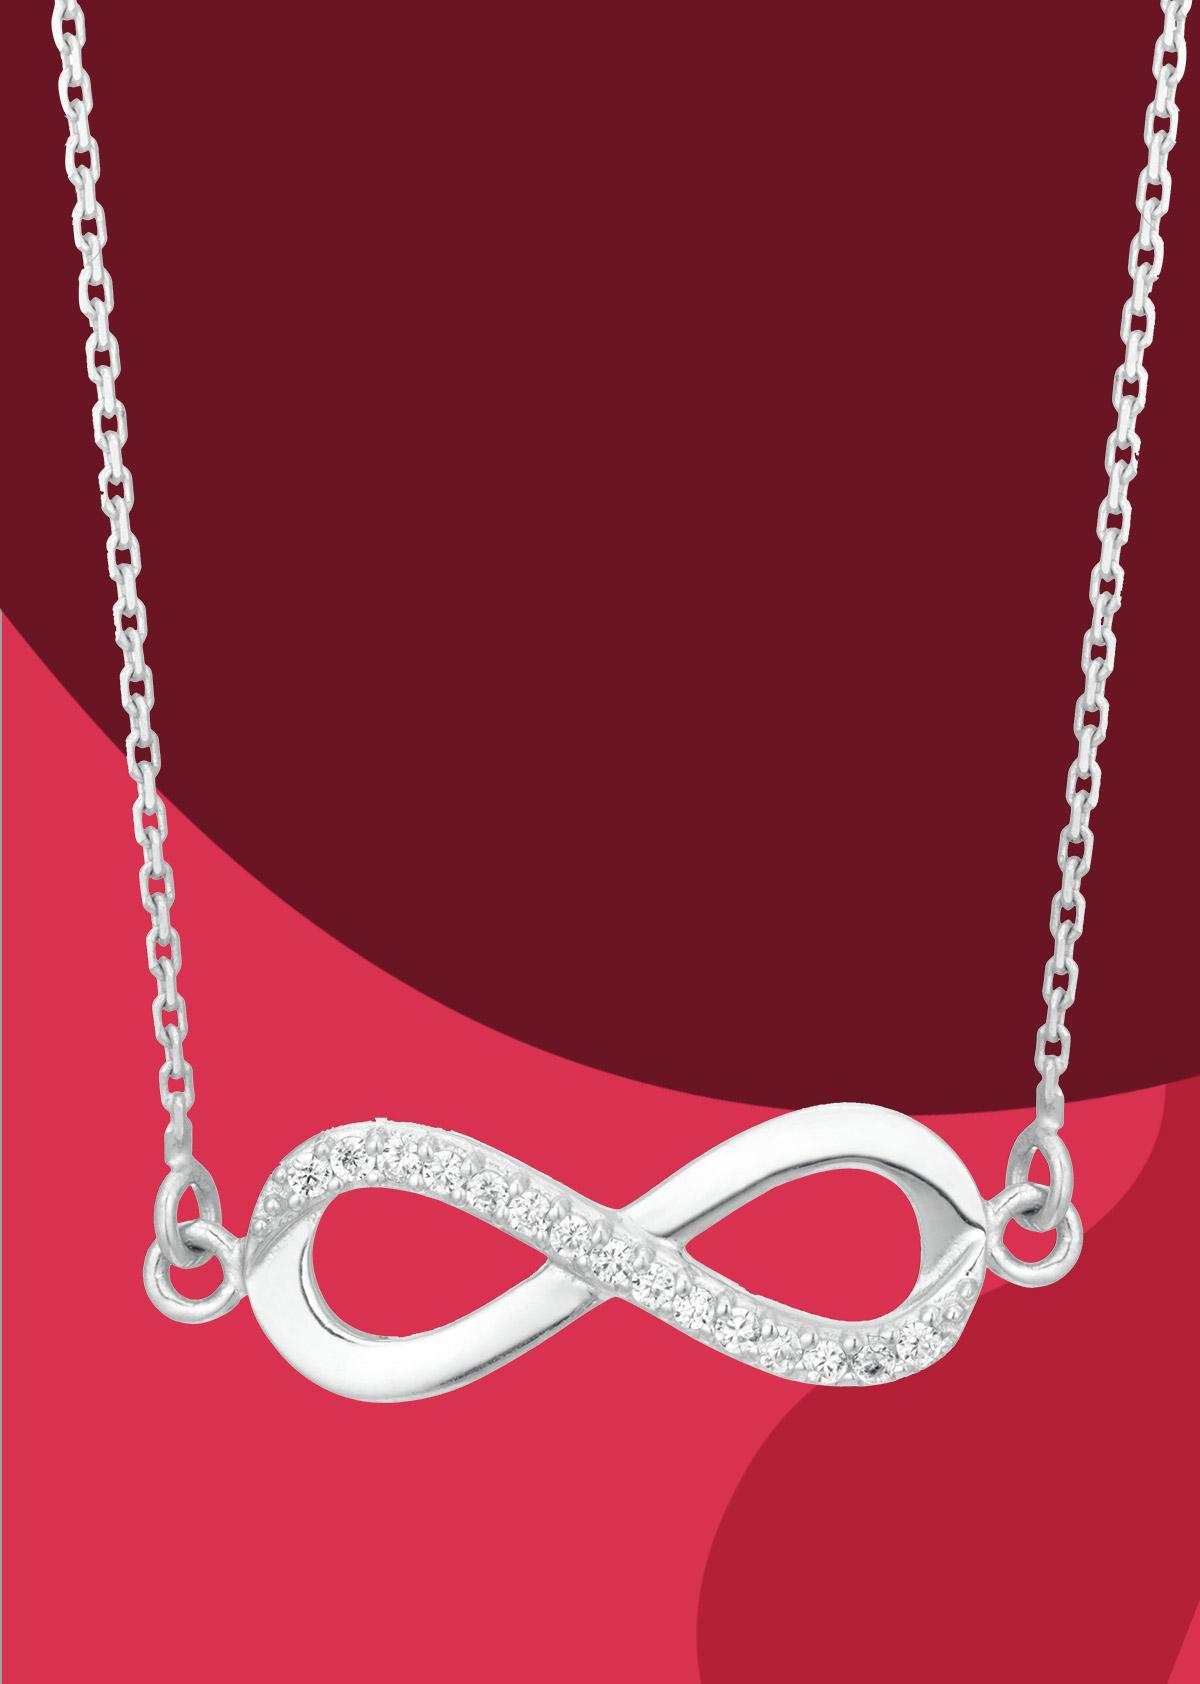 Infinity friendship necklace